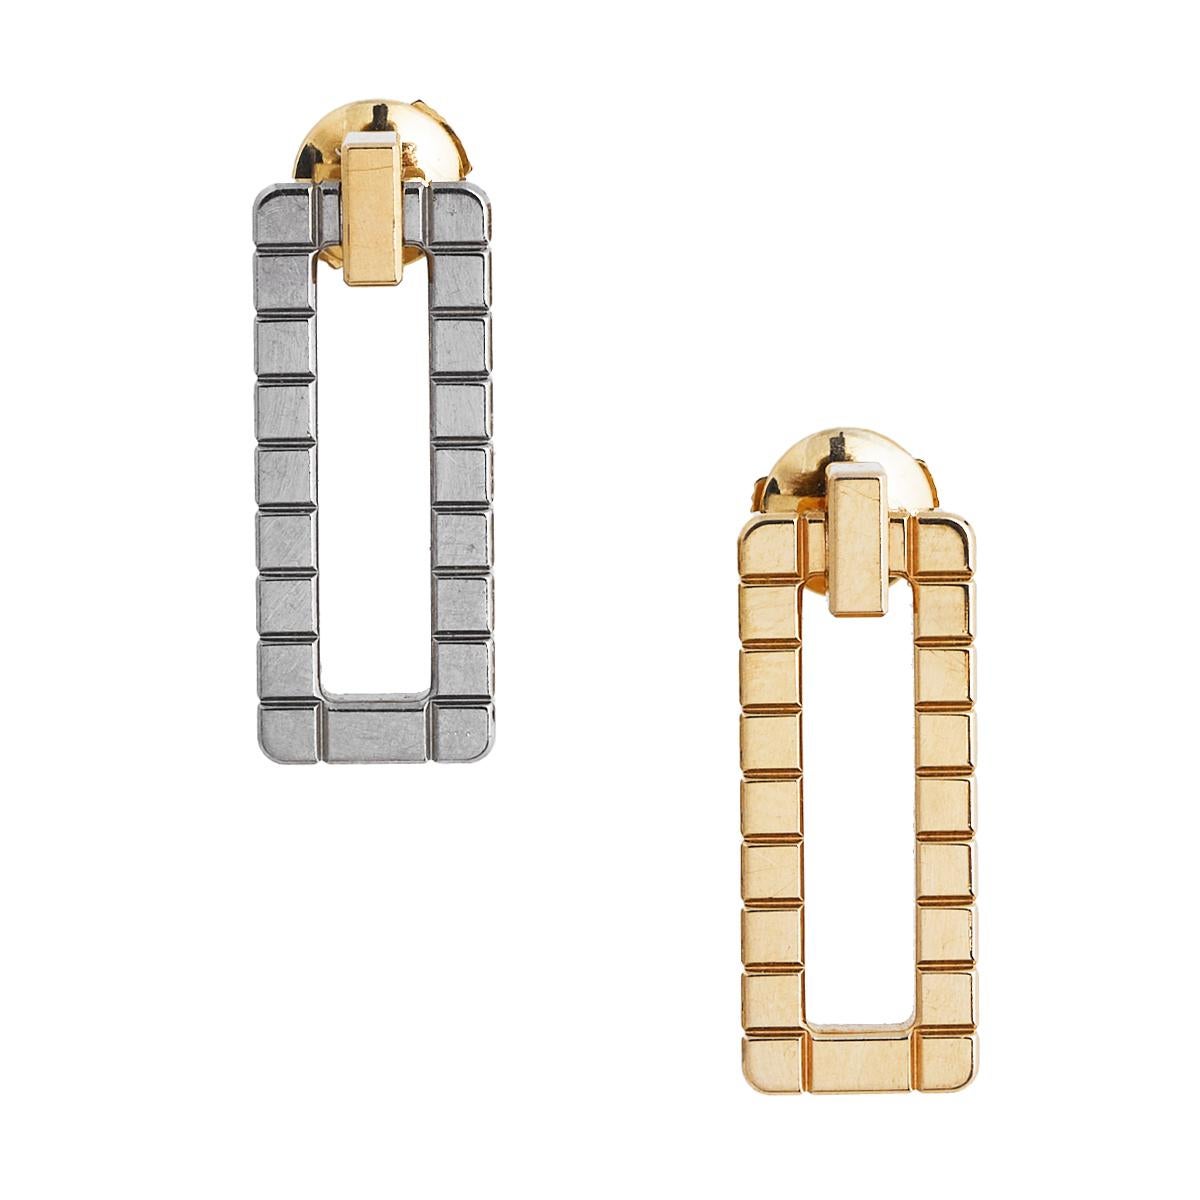 Gift yourself some love with this elegant pair of earrings from Chopard! They have been impeccably sculpted from 18k gold and detailed with textures mimicking ice cubes. The intricate geometrical cube shapes evoke the timeless allure of Chopard,